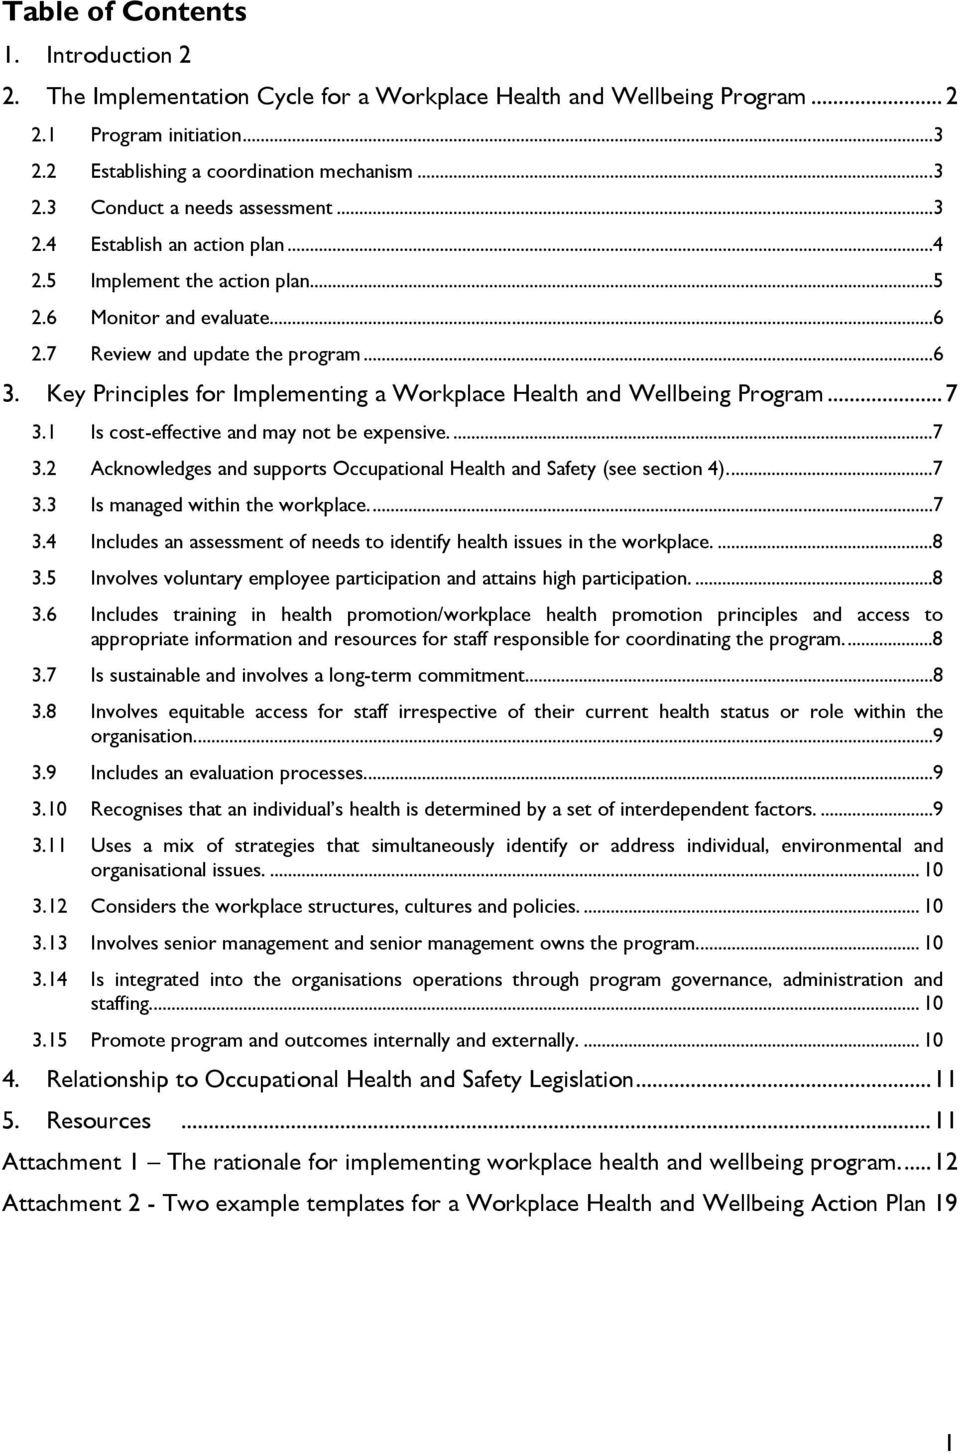 Key Principles for Implementing a Workplace Health and Wellbeing Program... 7 3.1 Is cost-effective and may not be expensive....7 3.2 Acknowledges and supports Occupational Health and Safety (see section 4).